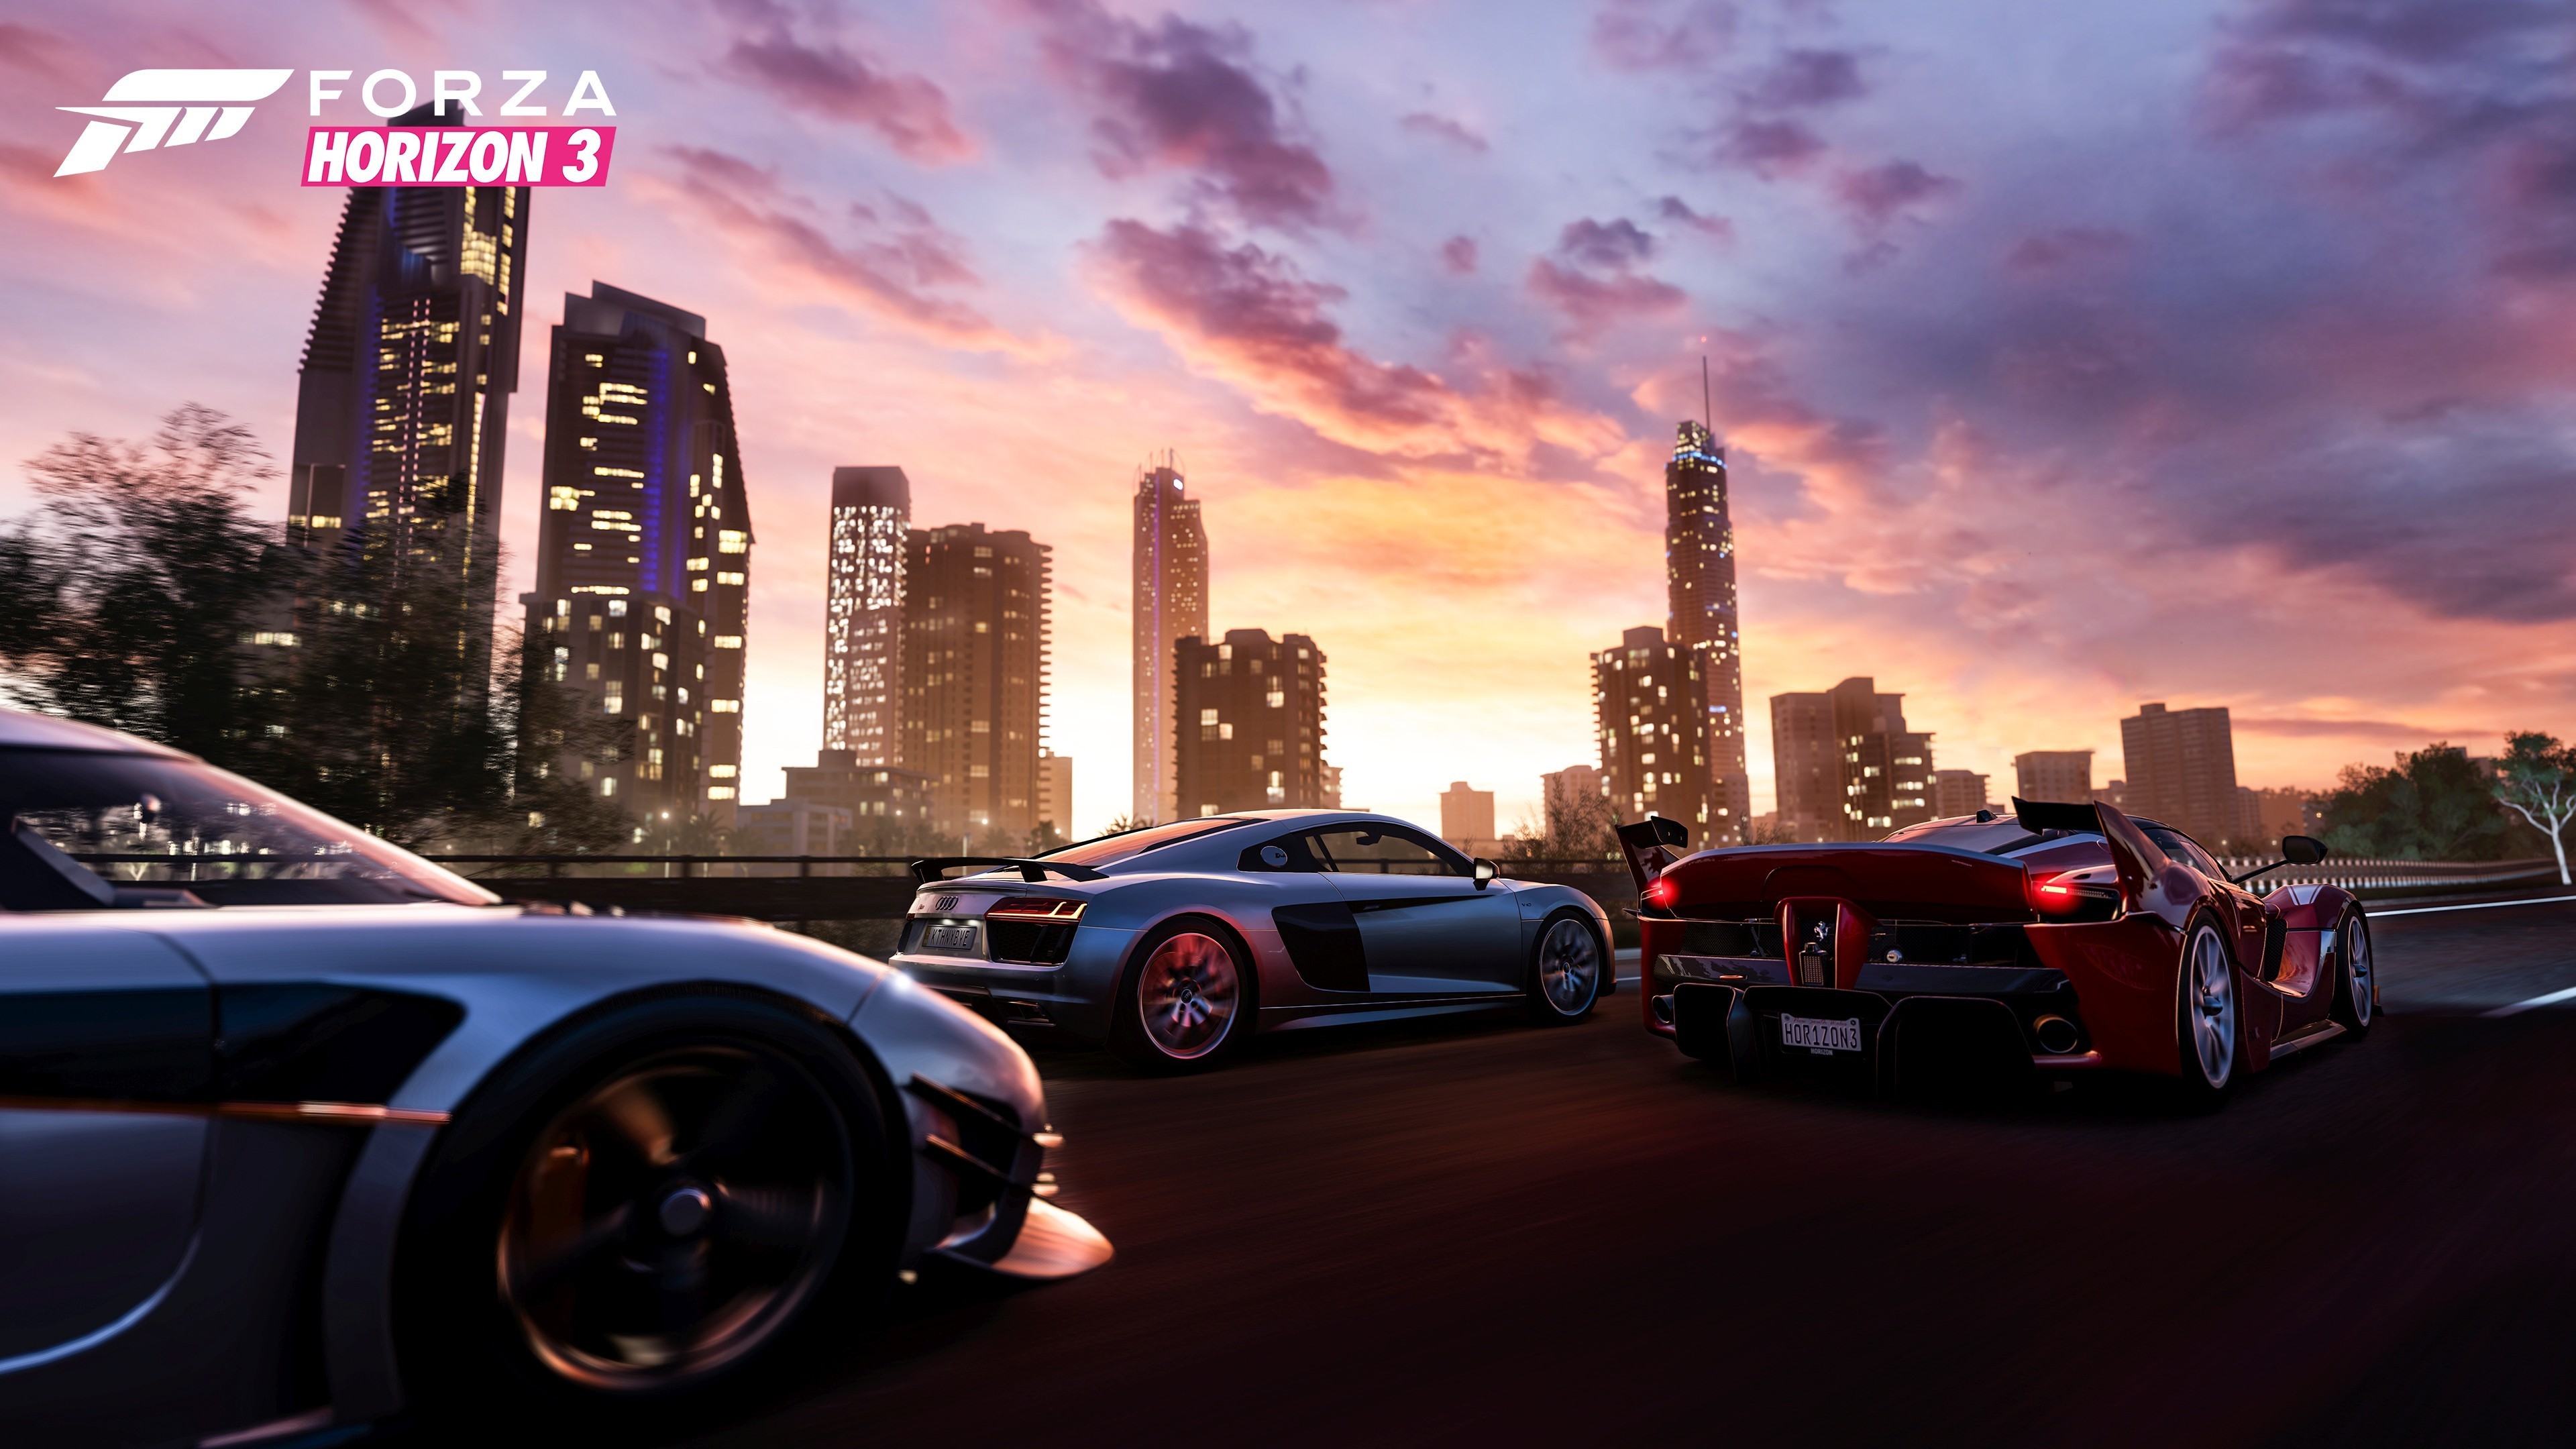 Windows on X: Save 30% on Forza Horizon 3 Ultimate Edition now through  June 19 in the Windows Store:  #Windows10   / X